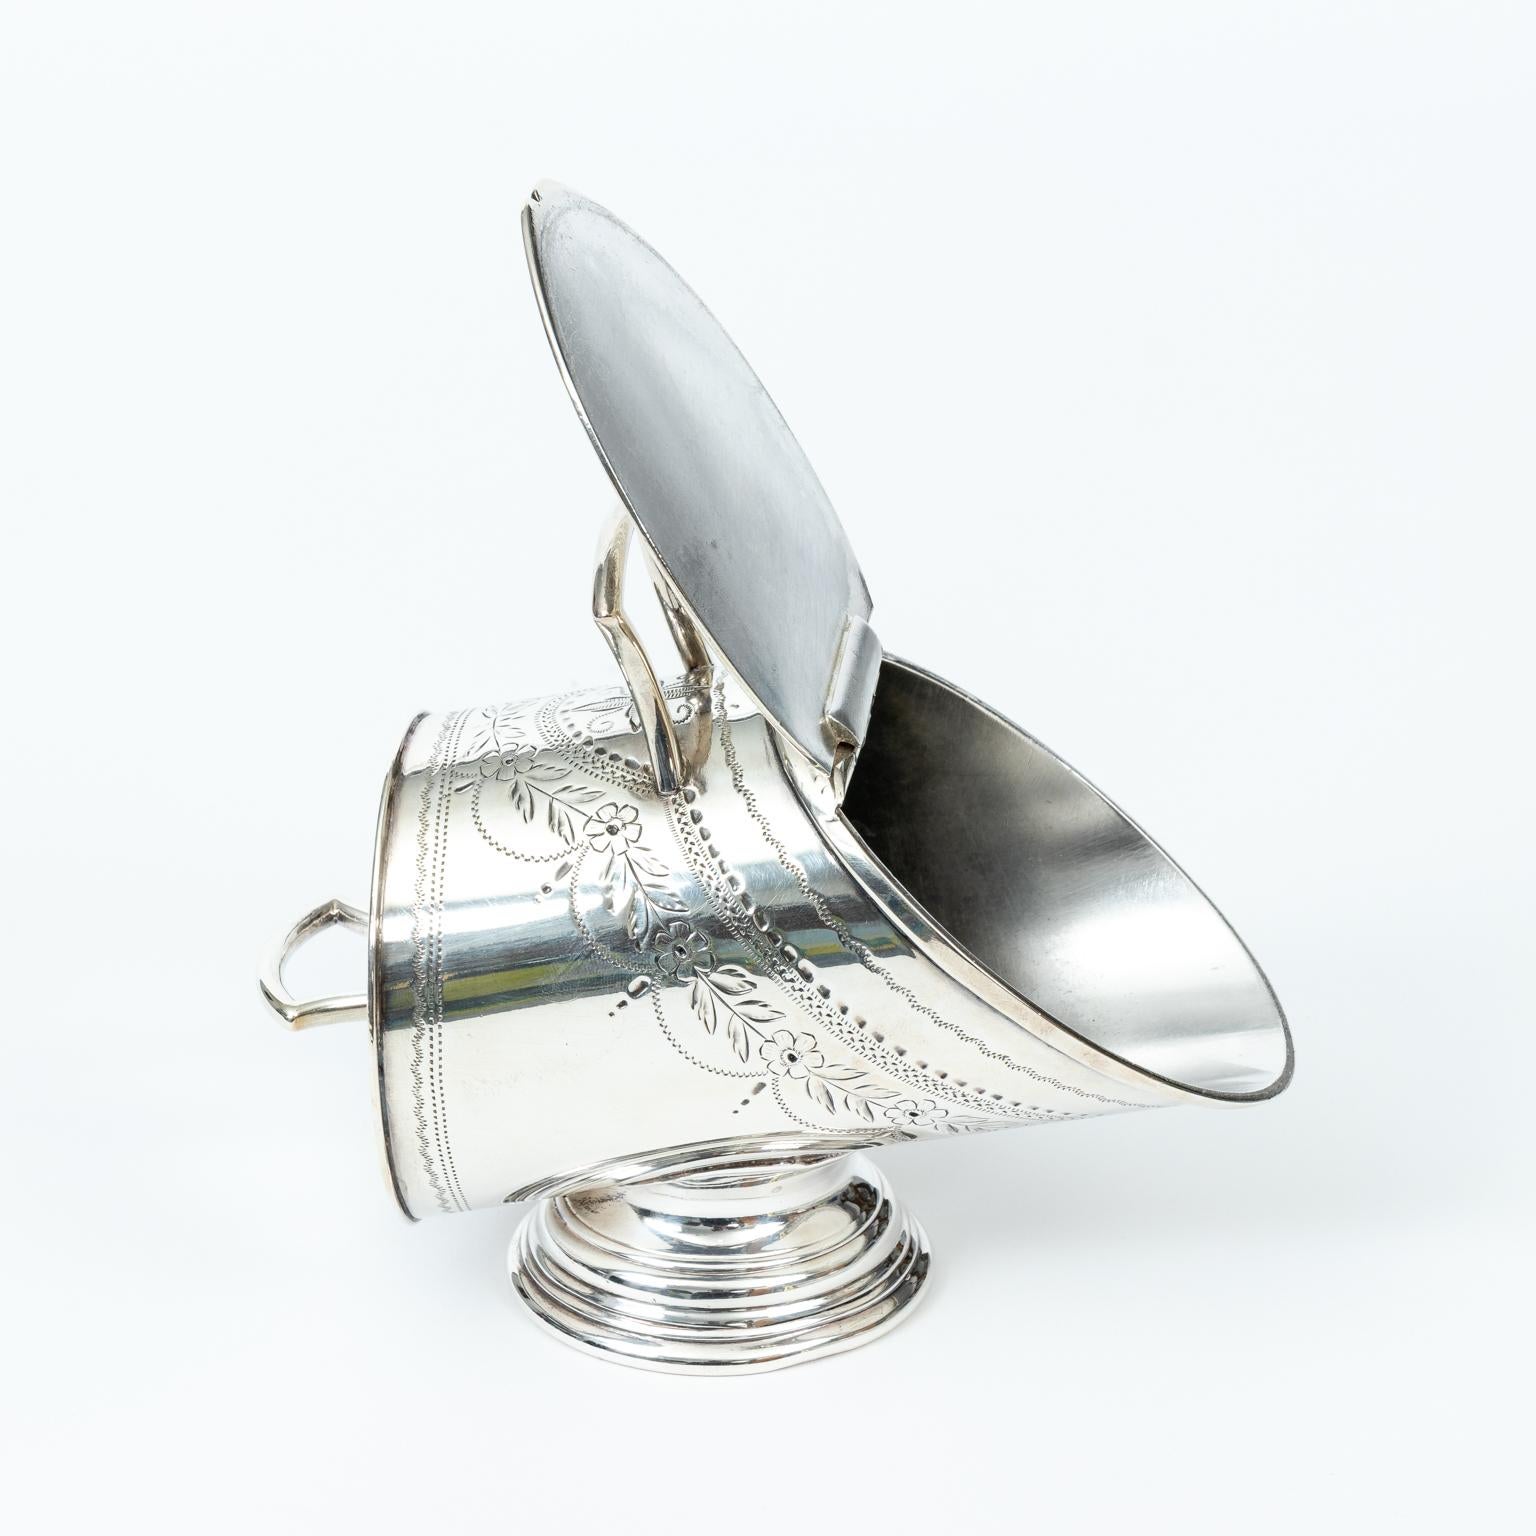 English Victorian sugar scuttle in silver plate, circa 1890s. The piece is detailed with foliage motifs throughout. Please note of wear consistent with age. The piece has been replated. Made in England.